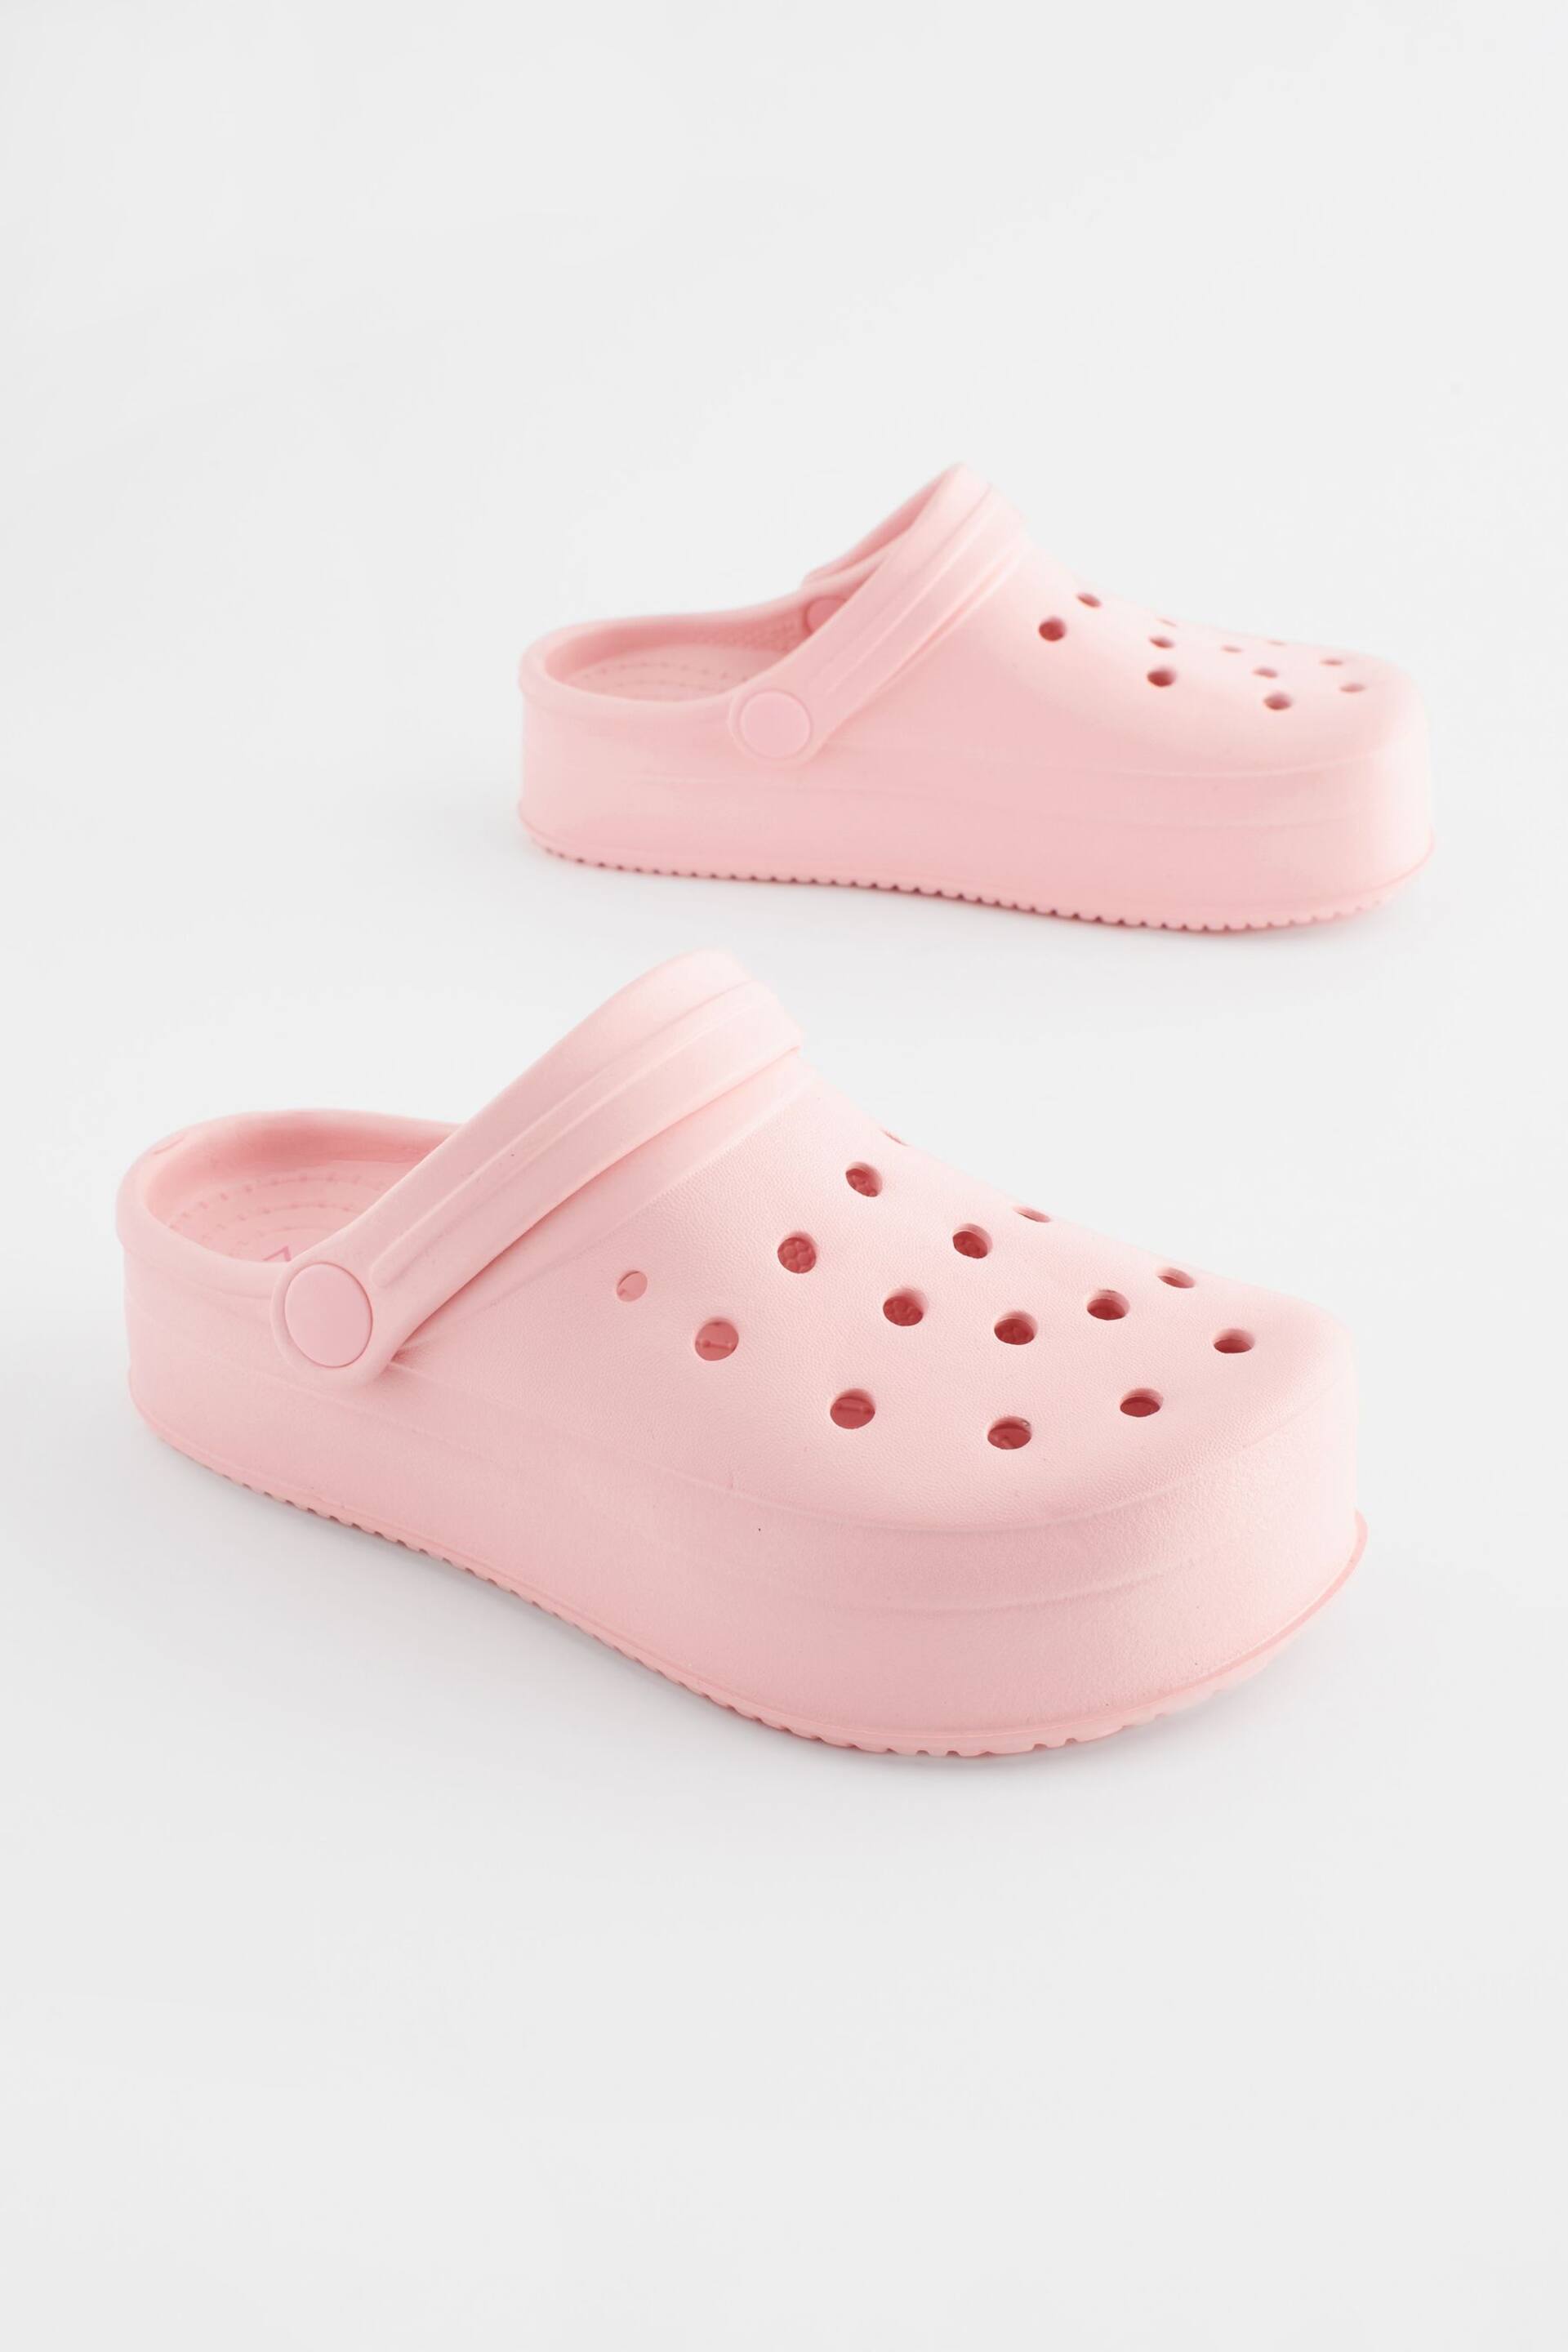 Pink Chunky Clogs - Image 4 of 9